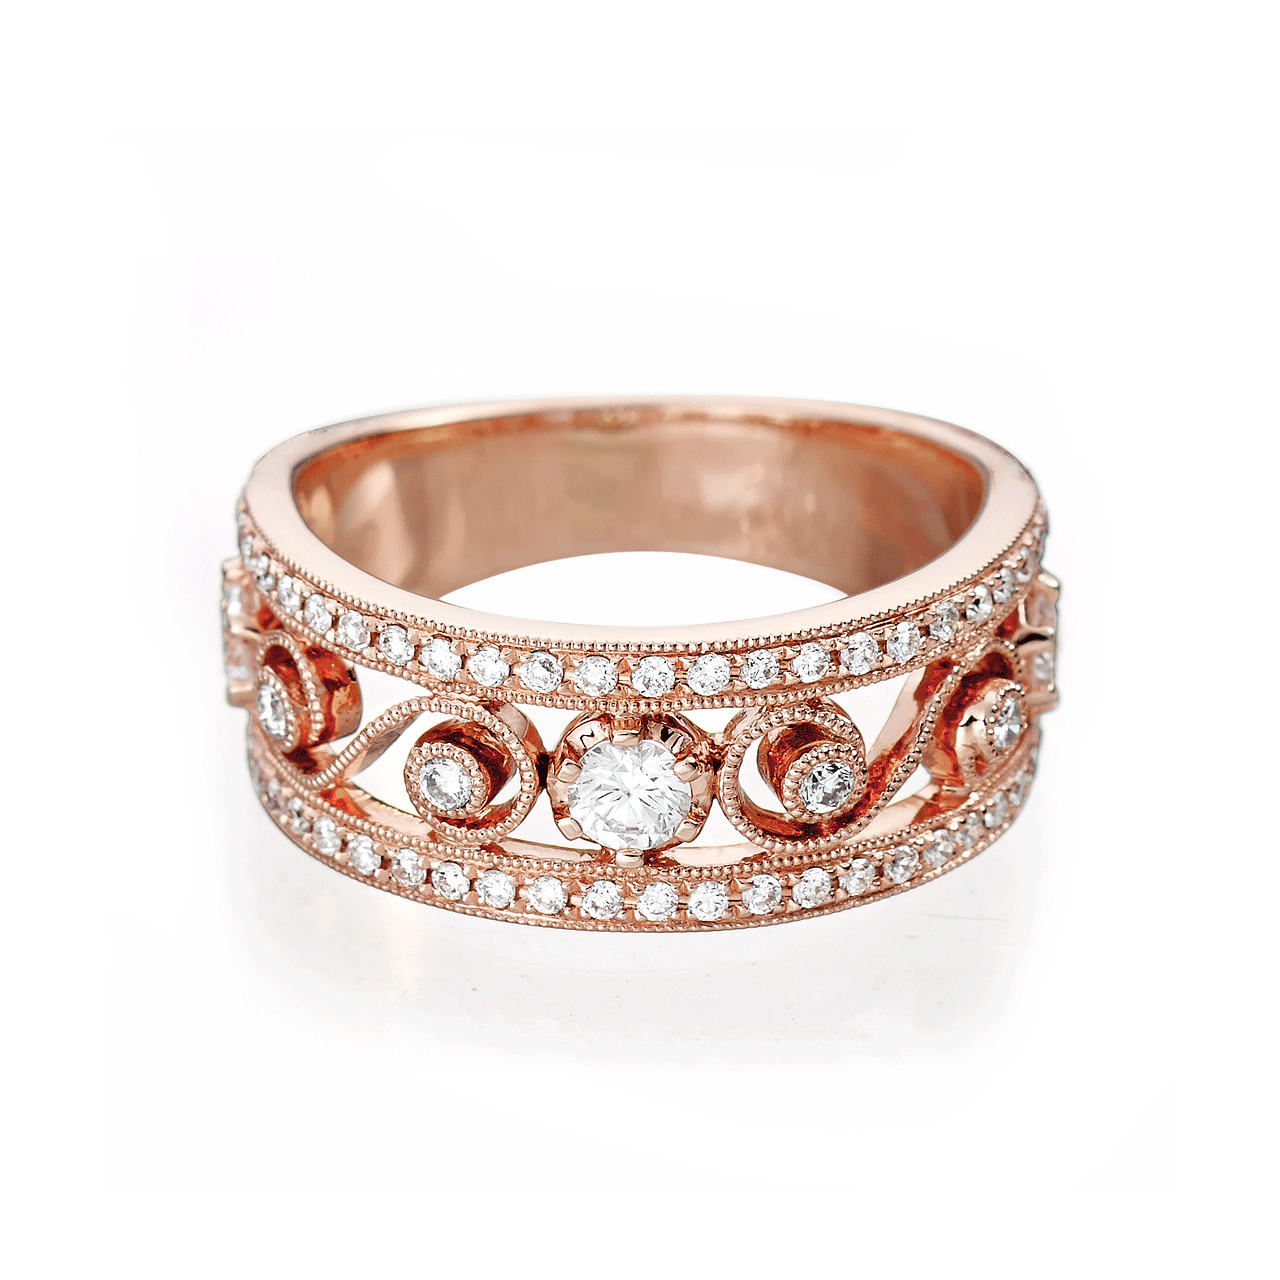 Heritage 18K Rose Gold and Diamond Wide Band